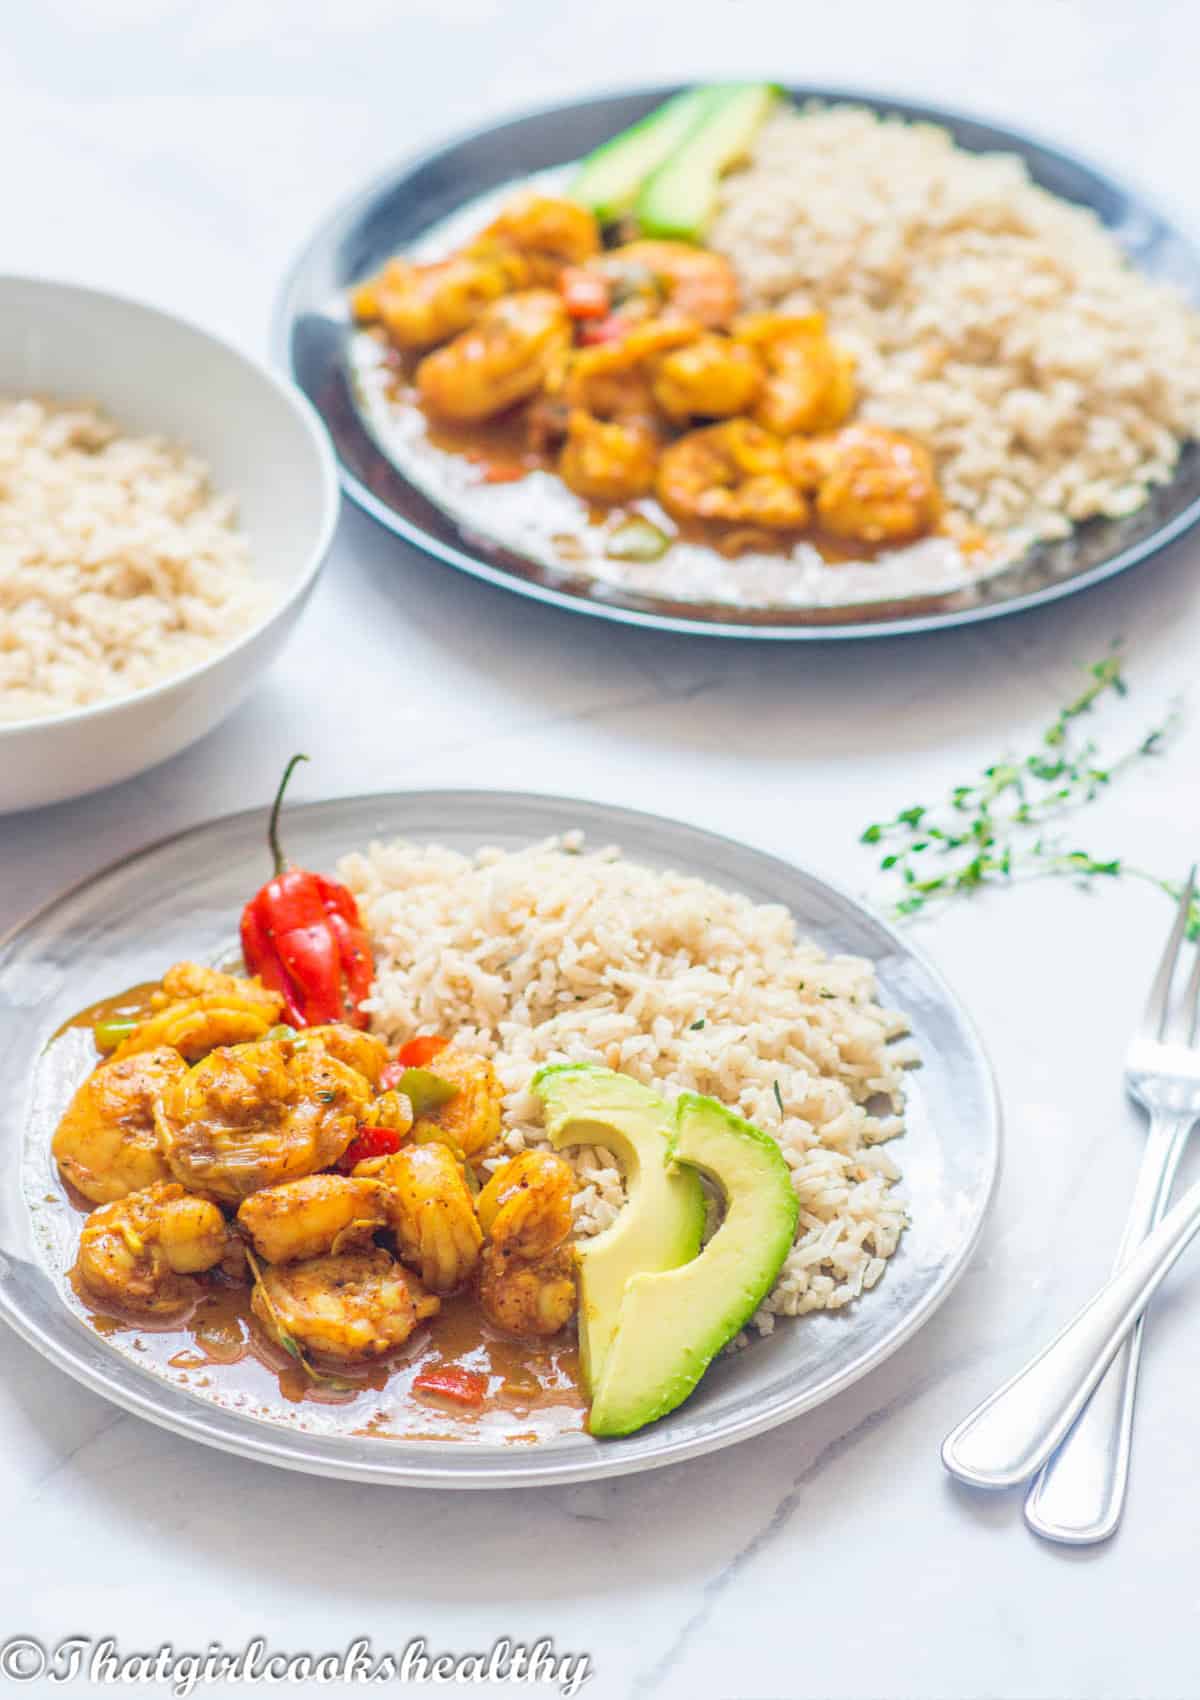 Shrimp on a grey plate with brown rice and avocado